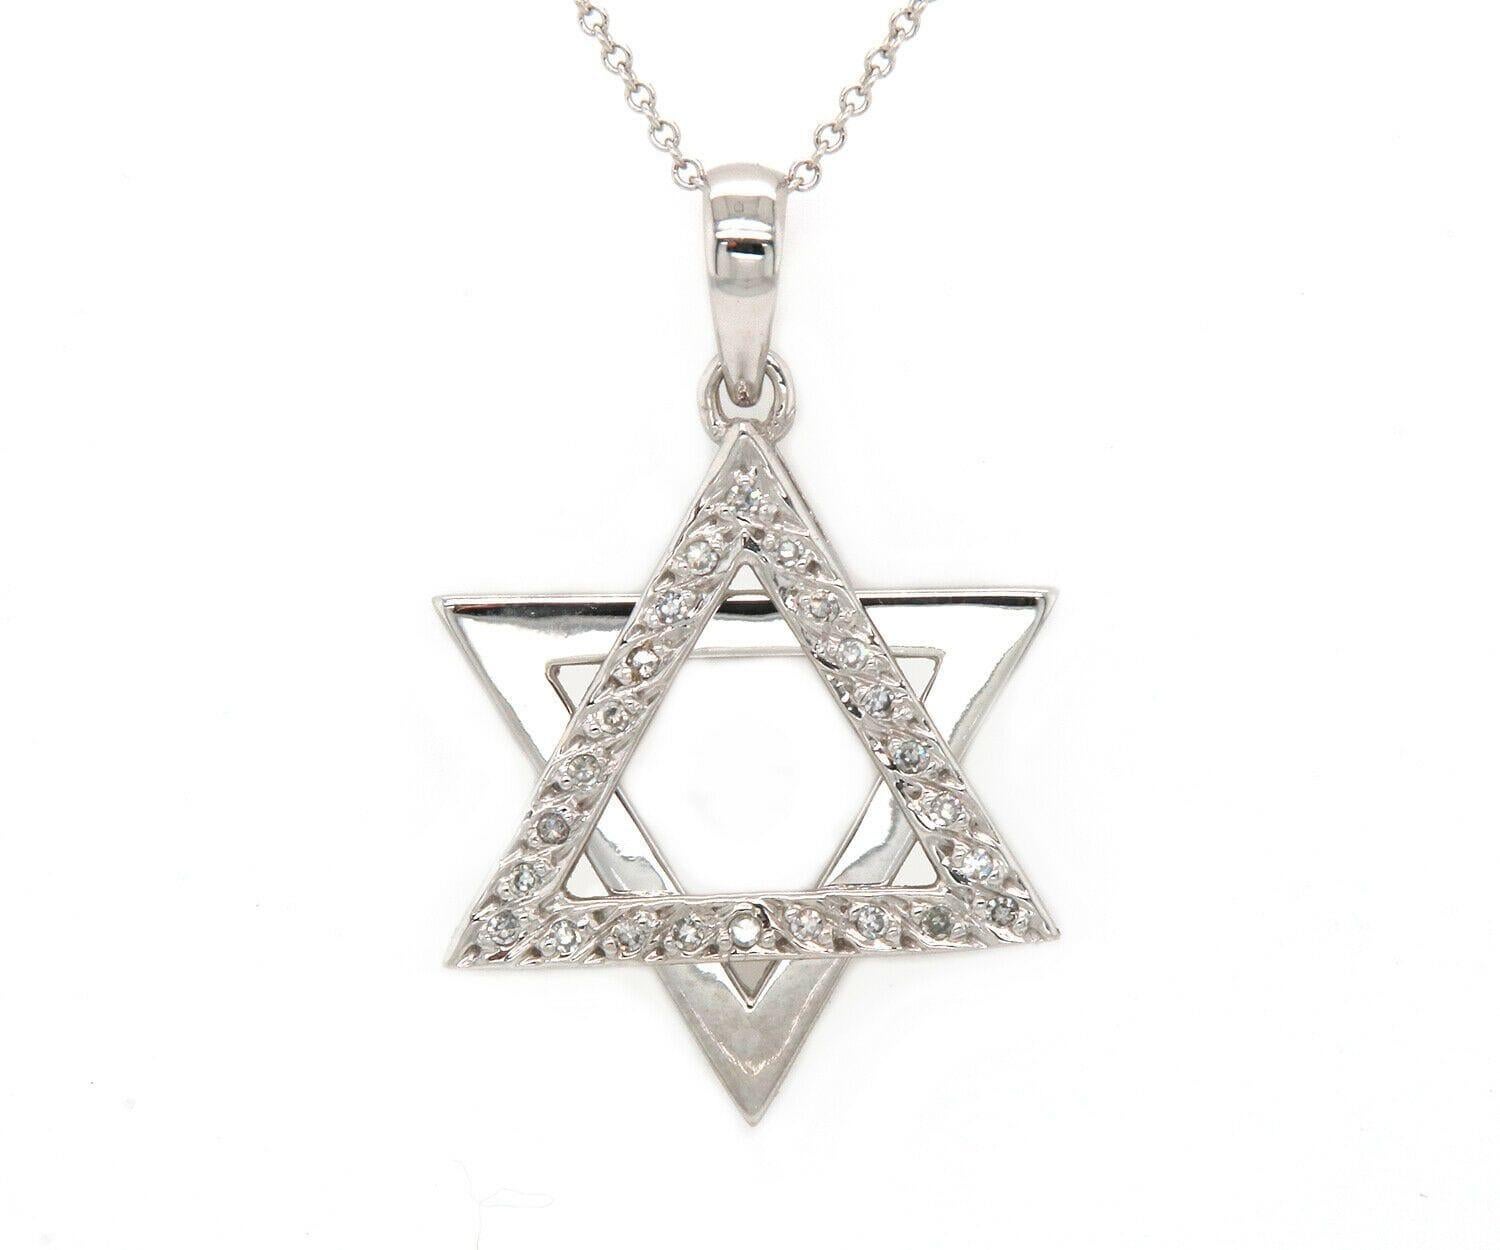 0.30ctw Diamond Star of David Pendant Necklace in 18K

Diamond Star of David Pendant Necklace
18K White Gold
Diamonds Carat Weight: Approx. 0.30ctw
Pendant Dimensions: Approx. 21.0 X 24.0 MM
Necklace Length: Approx. 18.0 Inches
Weight: Approx. 4.40